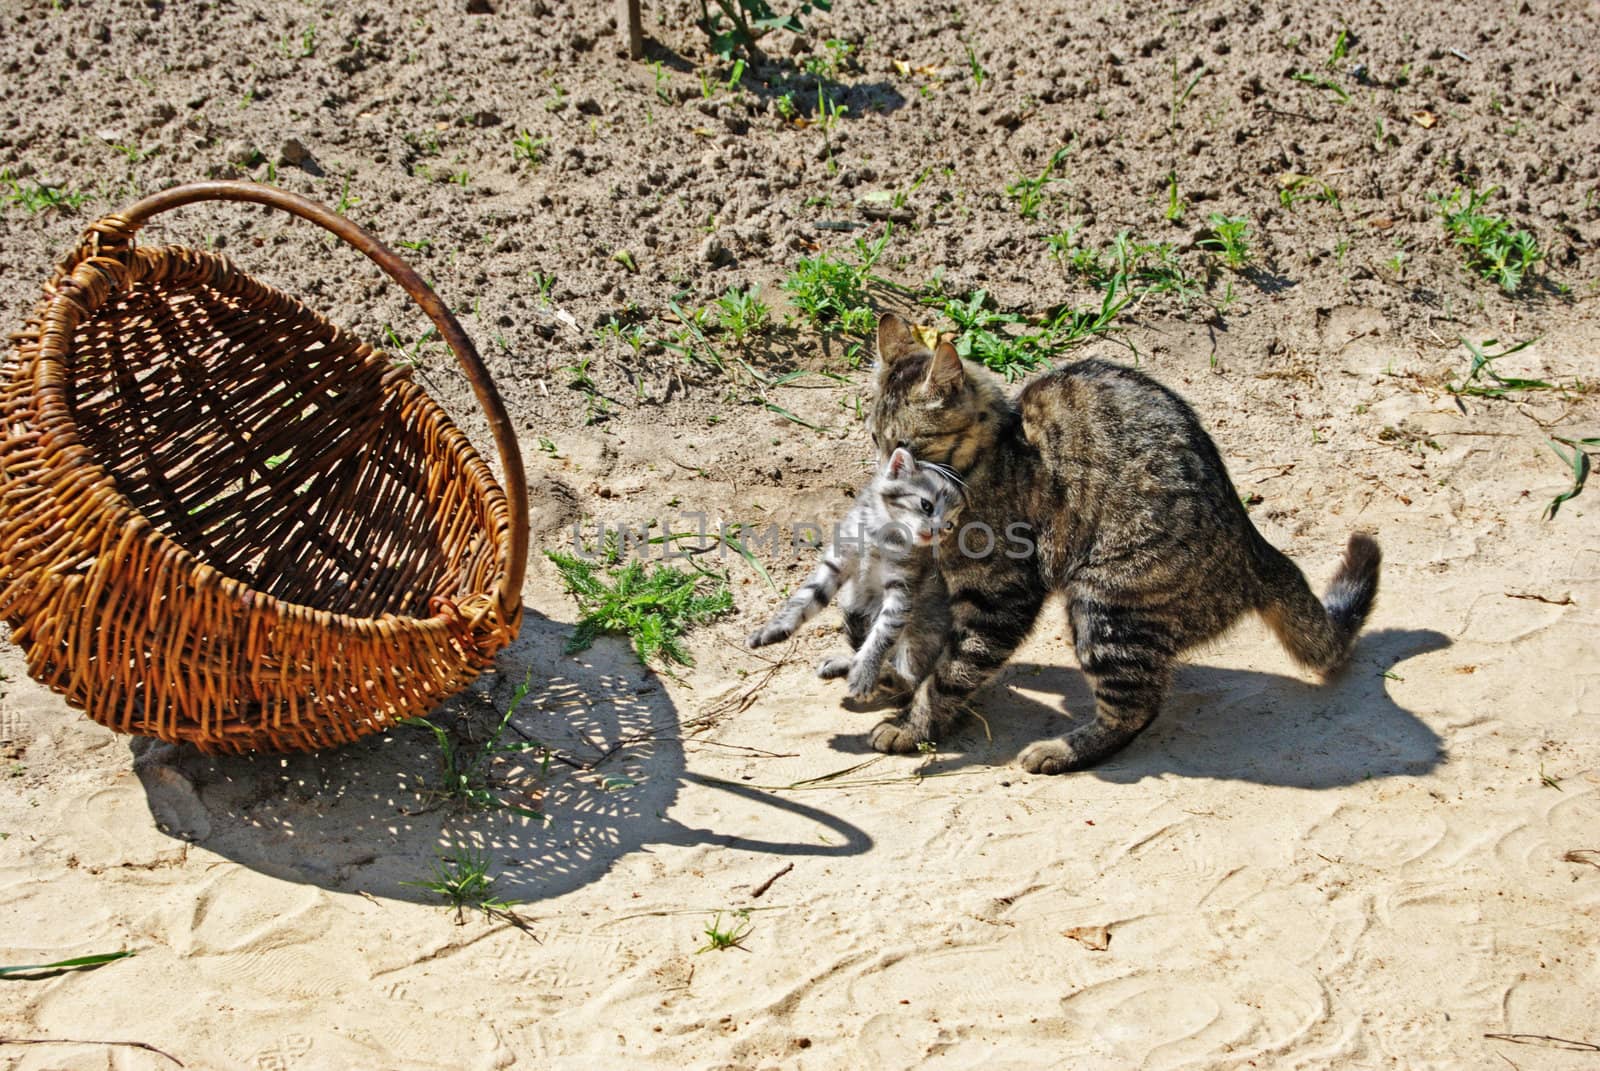 Lady-cat, kitten and basket. by Doctor